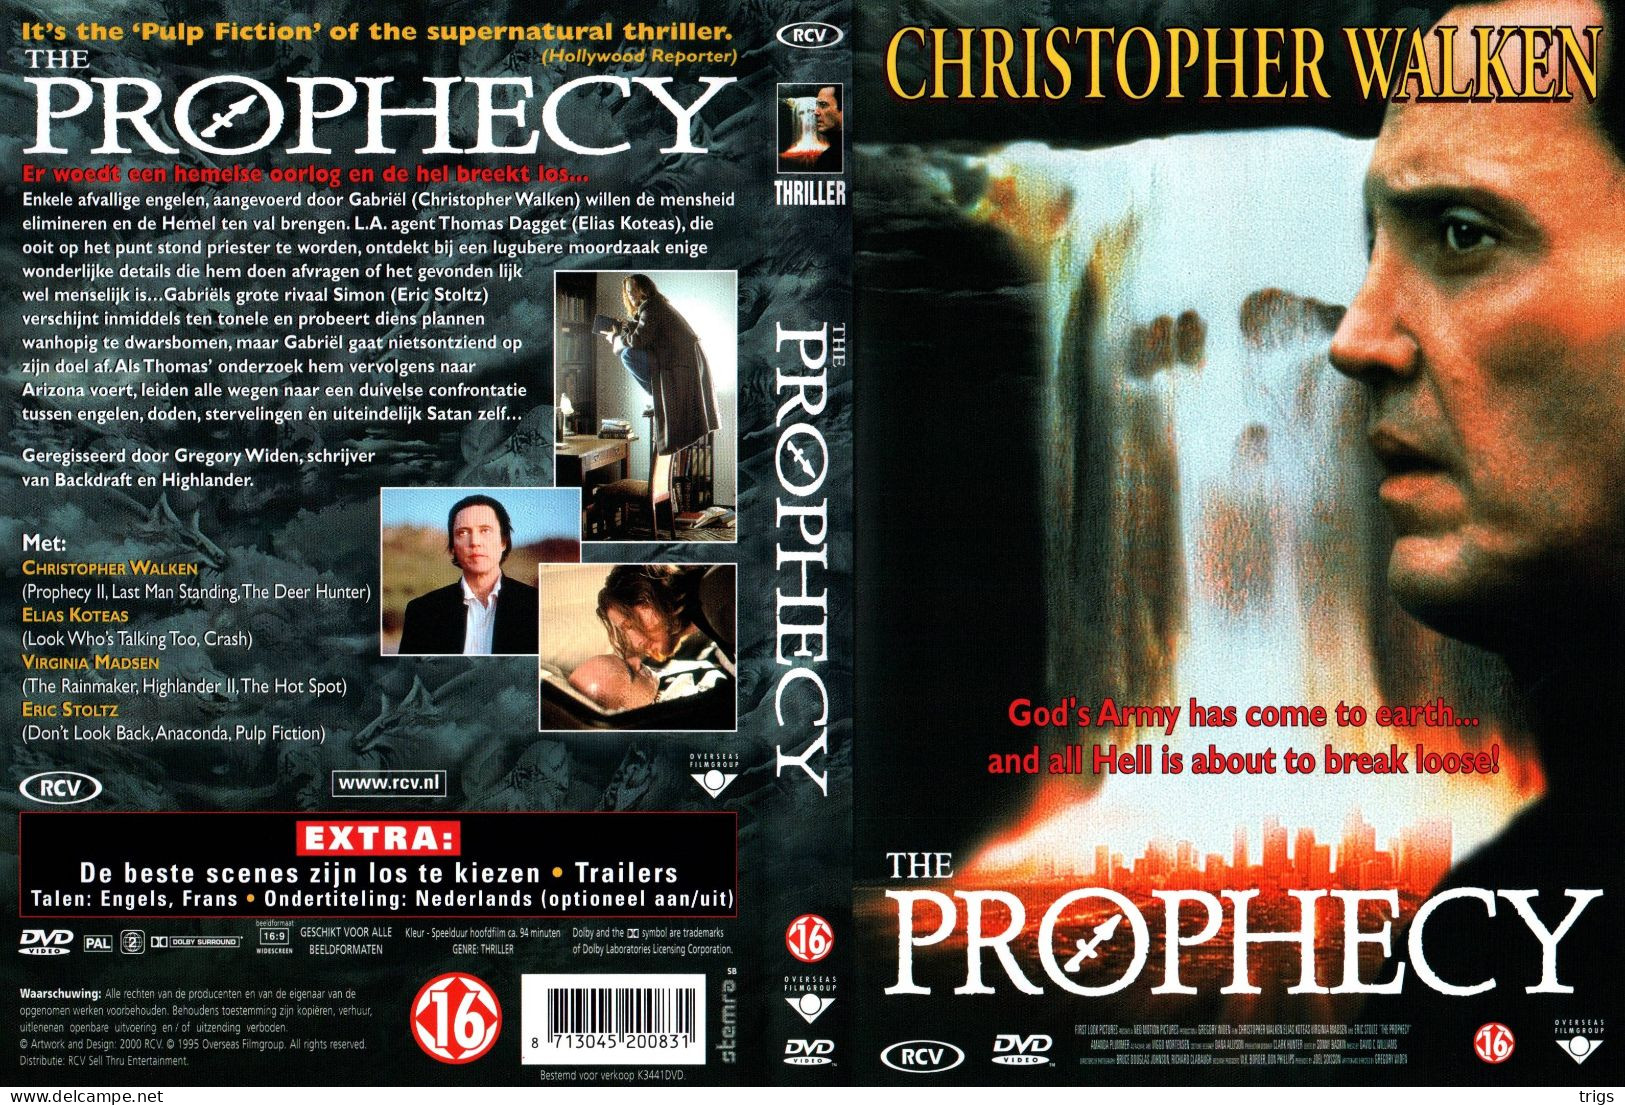 DVD - The Prophecy - Crime